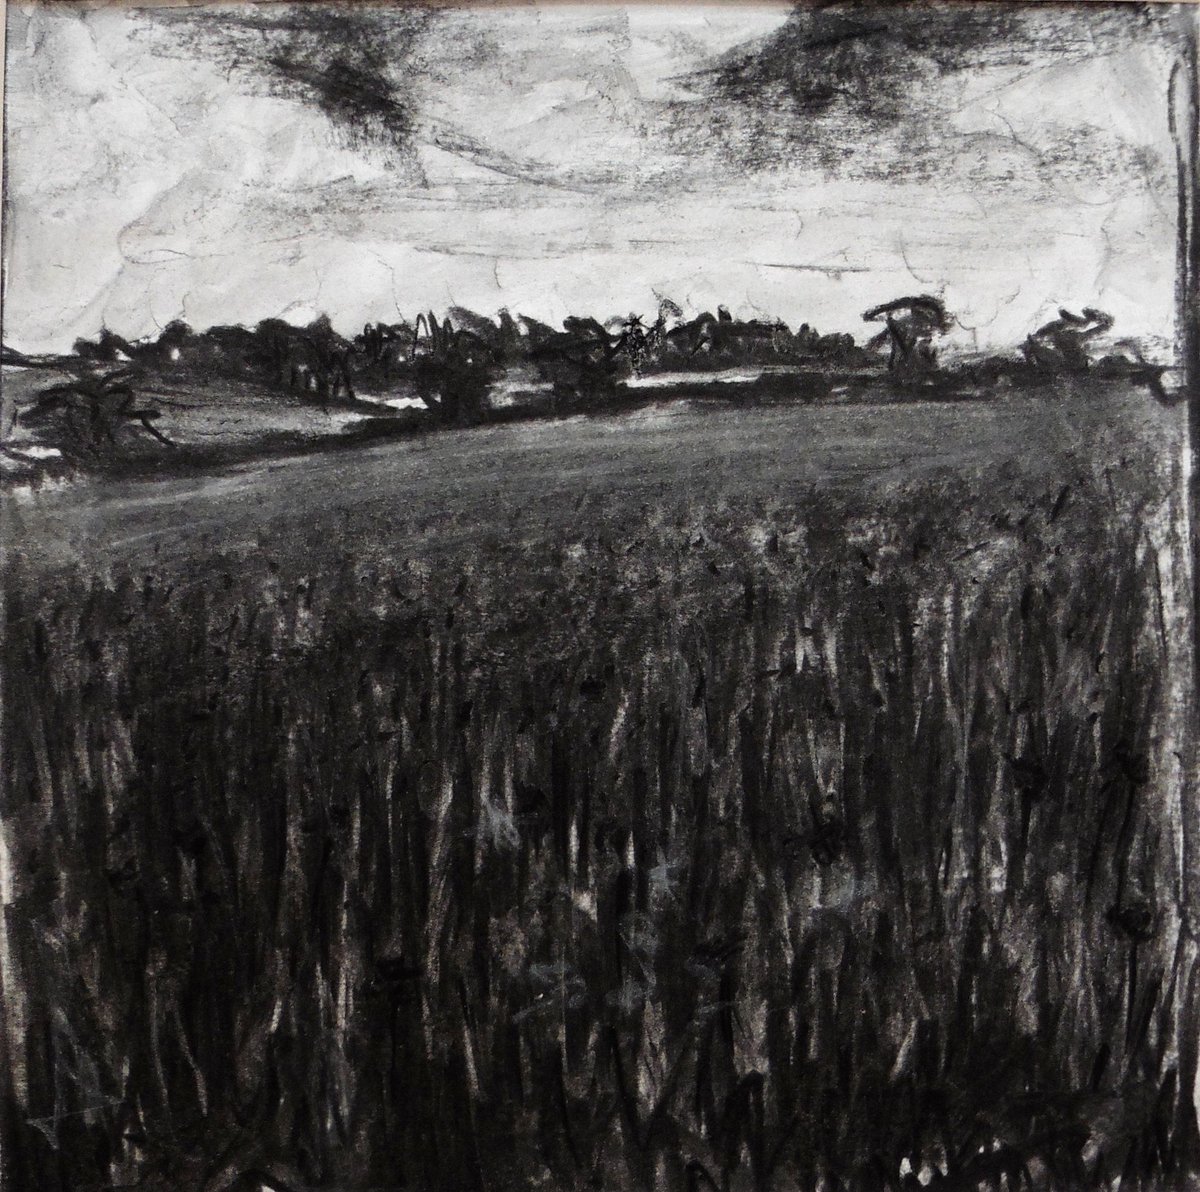 2018 CHAFF member Tina Dodd focuses on monochromatic exploration of the local landscape.  She uses charcoal, graphite and printmaking techniques to evoke the atmosphere of the Mendip Hills and surrounding #artstrial  #chaff #cheddarartsfringefestival2018 #cheddarartist